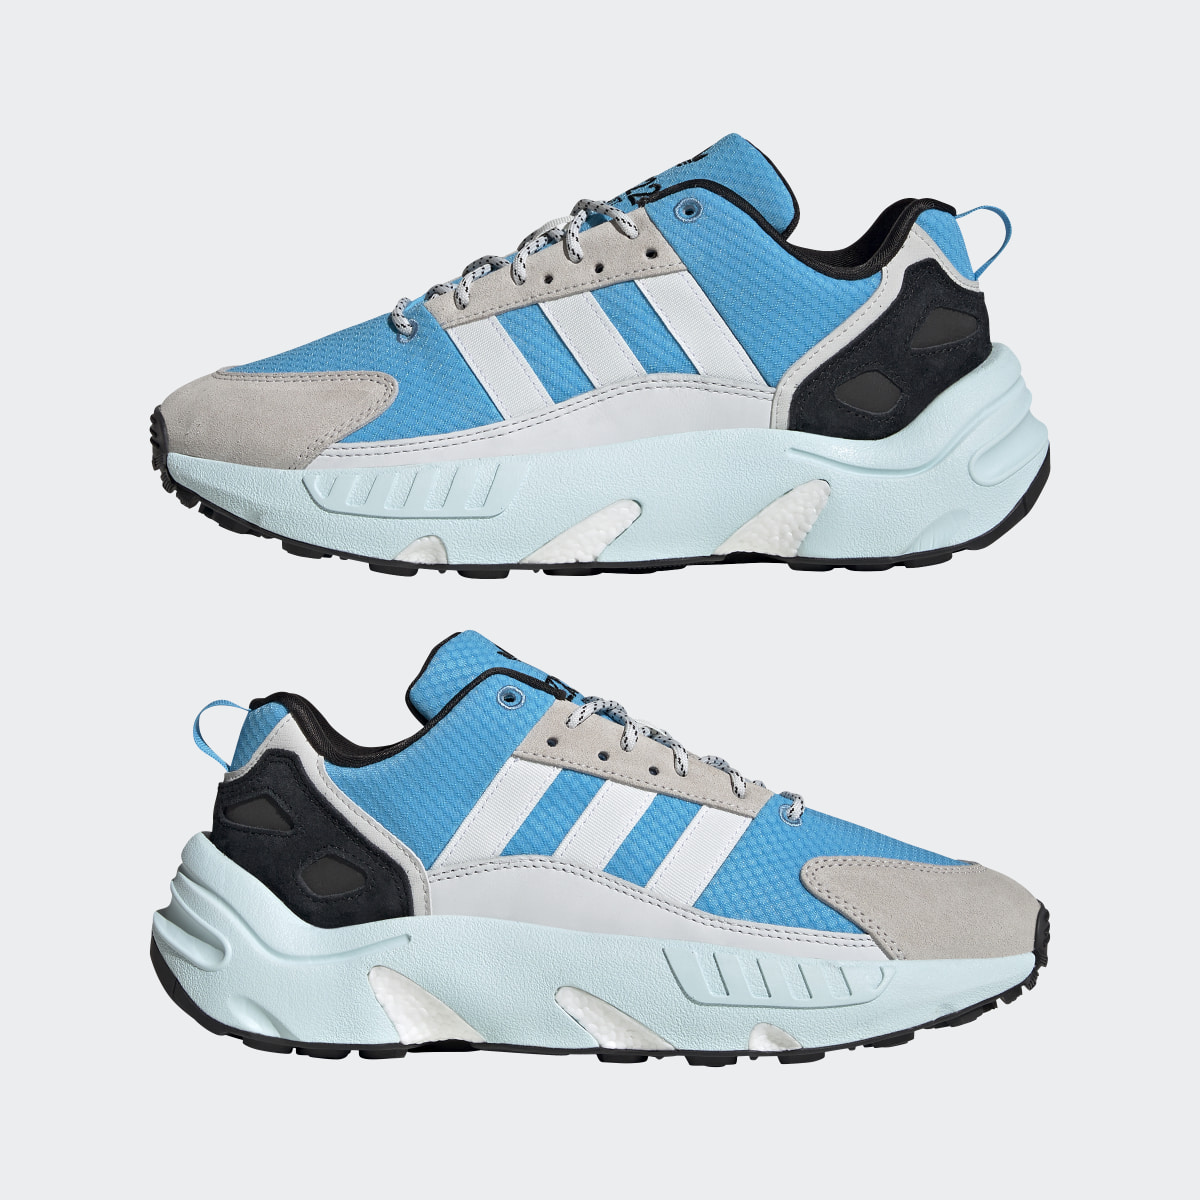 Adidas ZX 22 BOOST Shoes. 8